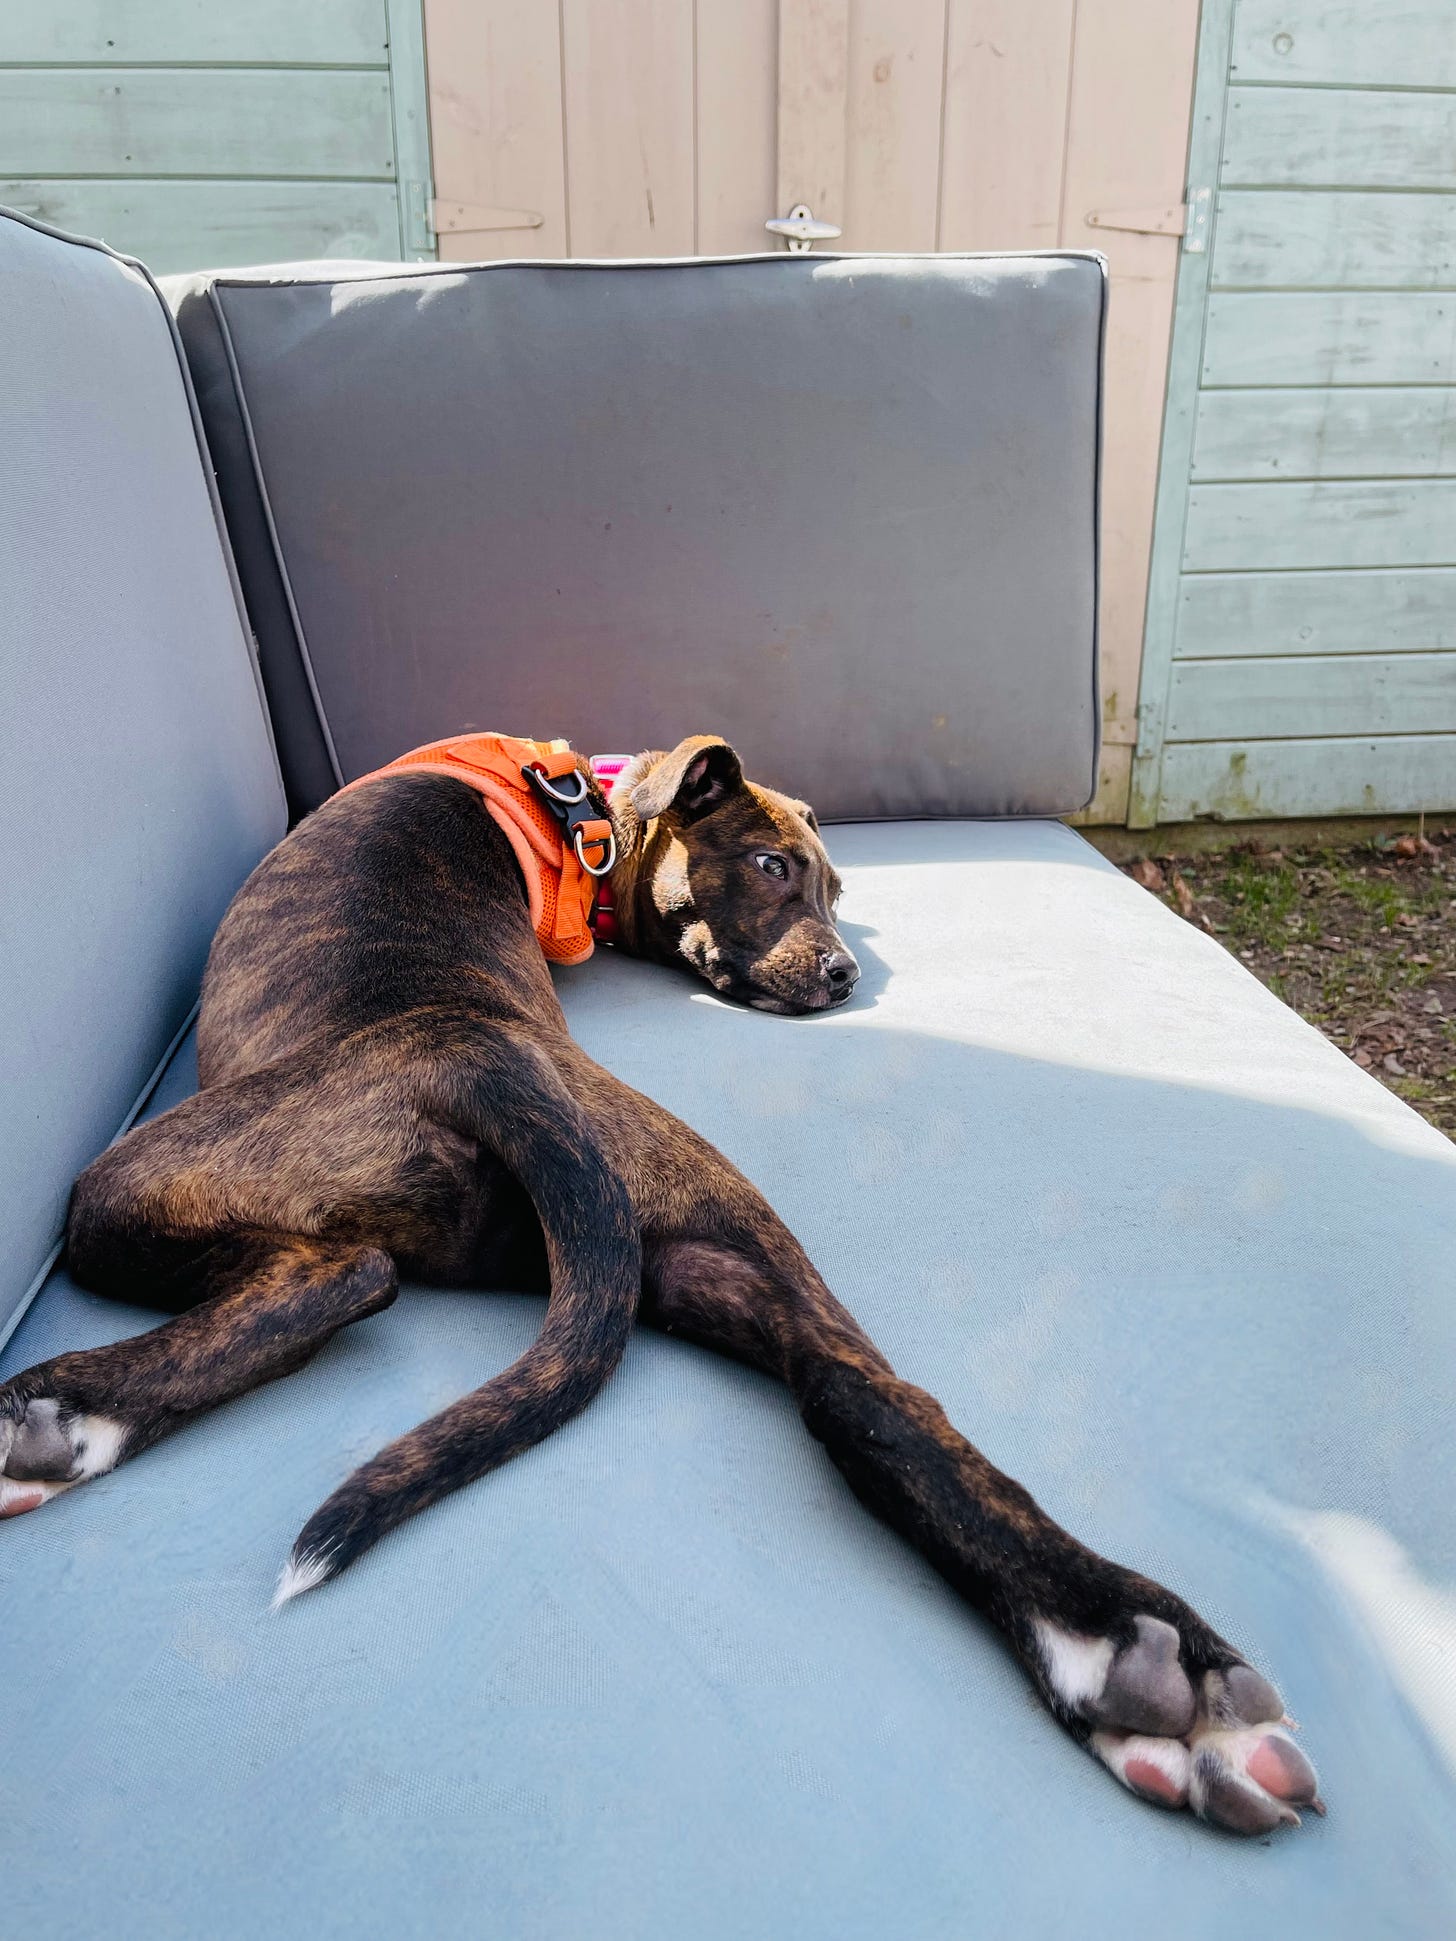 Puppy sprawled out on an outdoor couch